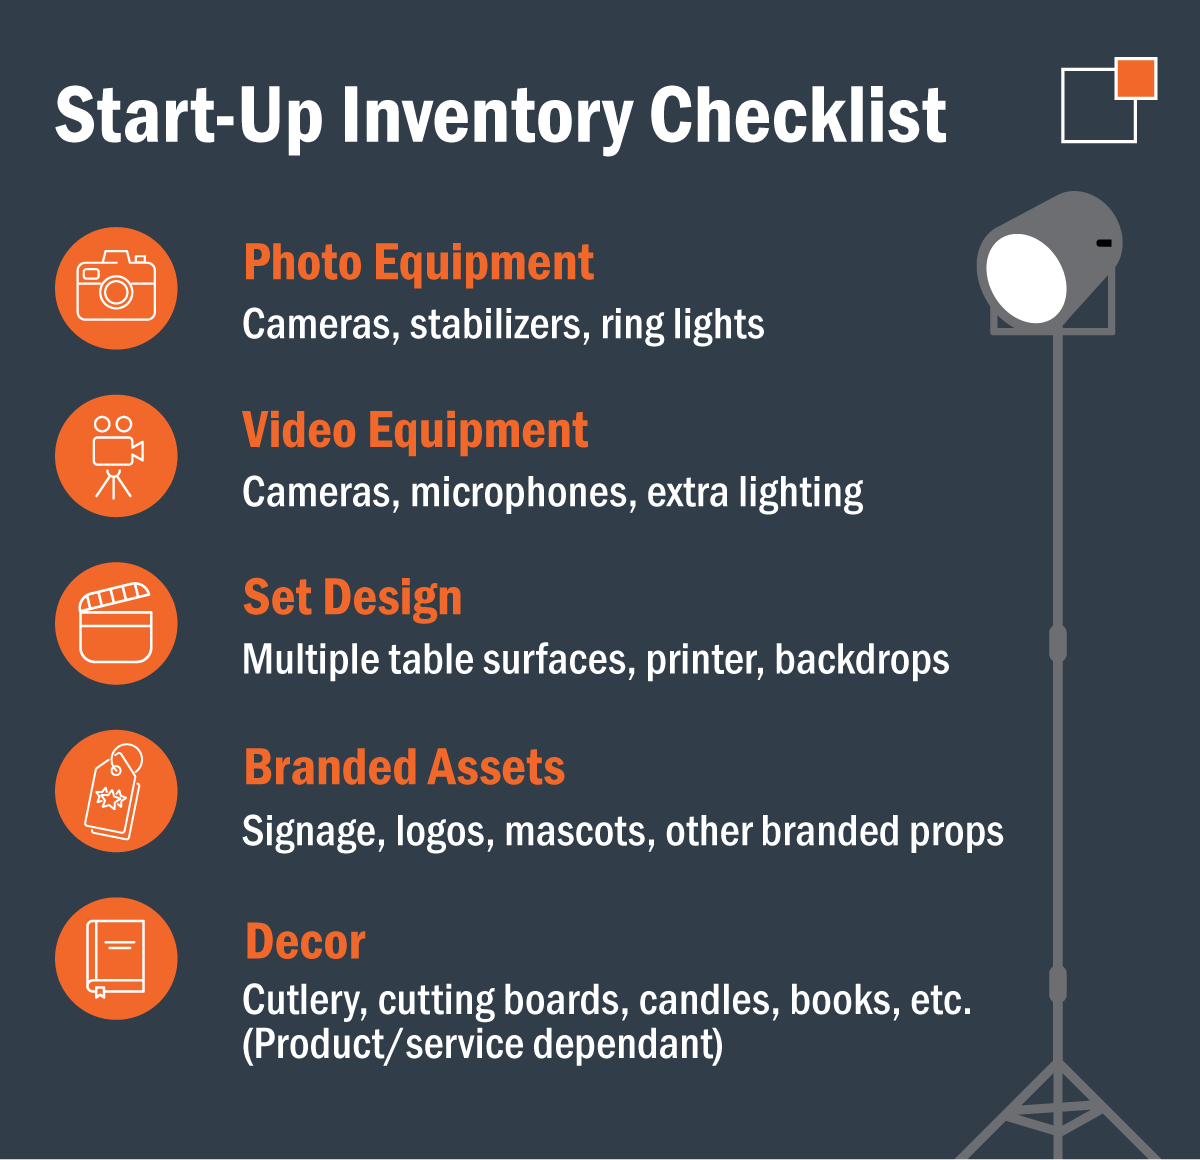 - Start-up Inventory Checklist: Photo equipment: Cameras, stabilizers, ring lights  Video equipment: Cameras, microphones, extra lighting  Set design: Multiple table surfaces, printer, backdrops  Branded assets: Signage, logos, mascots, other branded props  Decor: Cutlery, cutting boards, candles, books, etc. (Product/service dependant)